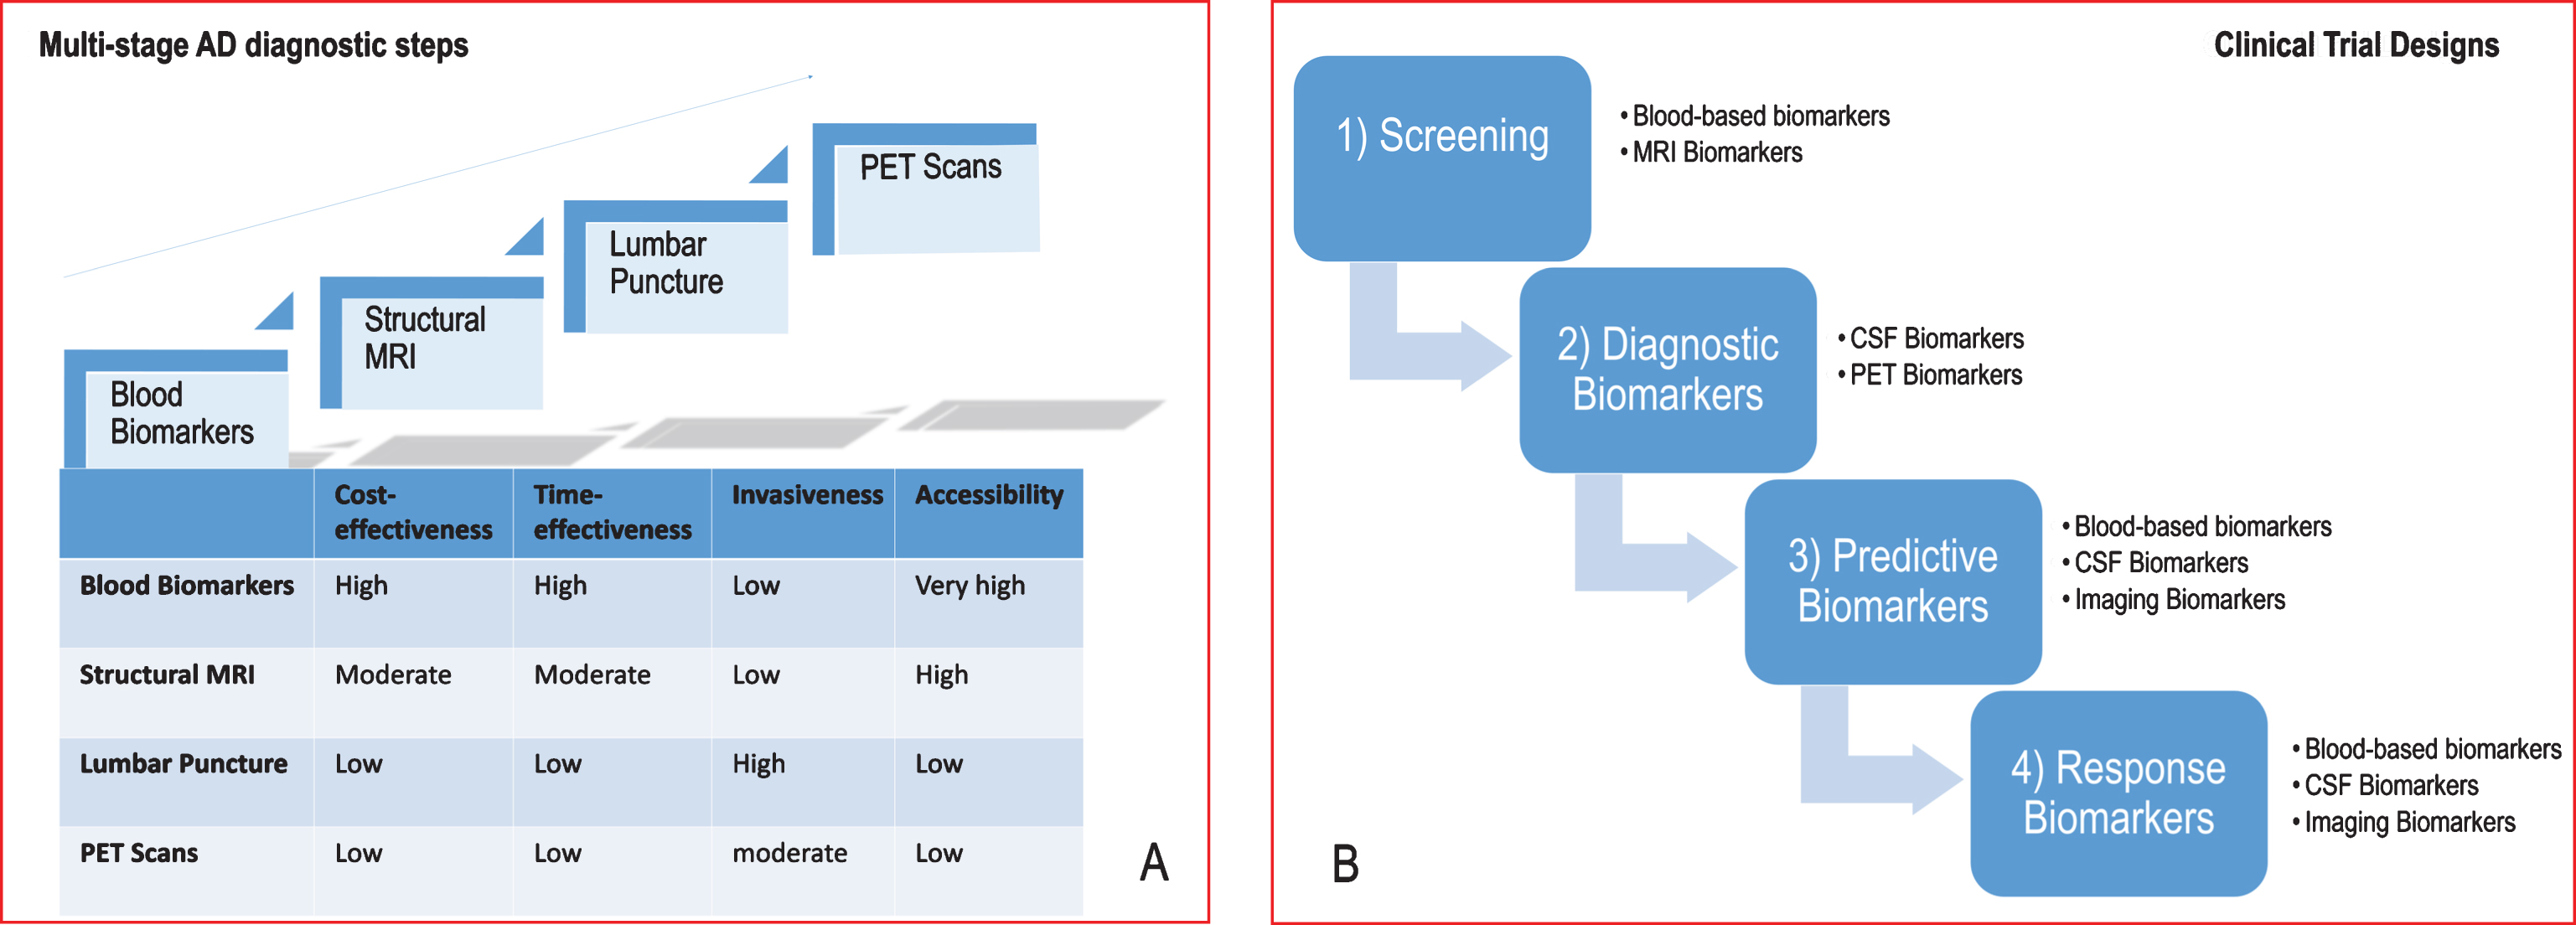 Evolving spectrum of biomarkers and modalities. A) The ideal biomarker should be minimally-invasive, unexpansive, practical, rapid and reliable with low level of expertise required. Therefore, in the clinical-setting, biomarkers should be assessed in a multi-stage diagnostic workout carried-out along four steps (blood biomarkers, structural MRI, lumbar puncture, PET scans) according to the overall balance among the following factors: cost-effectiveness, time-effectiveness, invasiveness and accessibility. B) Biomarkers represent one strategy to tailor therapy. The idealistic markers for ND would enable their implementation in screening, diagnosis, progression of the disease, and monitoring of the response to therapy. Therefore, in clinical trials, biomarkers can be used for several purposes: 1) to identify people eligible for the trial, i.e., those considered at high risk for ND (screening biomarkers); 2) to guide clinical diagnosis (diagnostic markers); 3) to optimize treatment decisions, providing information on the likelihood of response to a given drug (predictive biomarkers); 4) to detect and quantify the response rate to treatment (response markers). MRI, magnetic resonance imaging; PET, positron emission tomography; ND, neurodegenerative diseases.